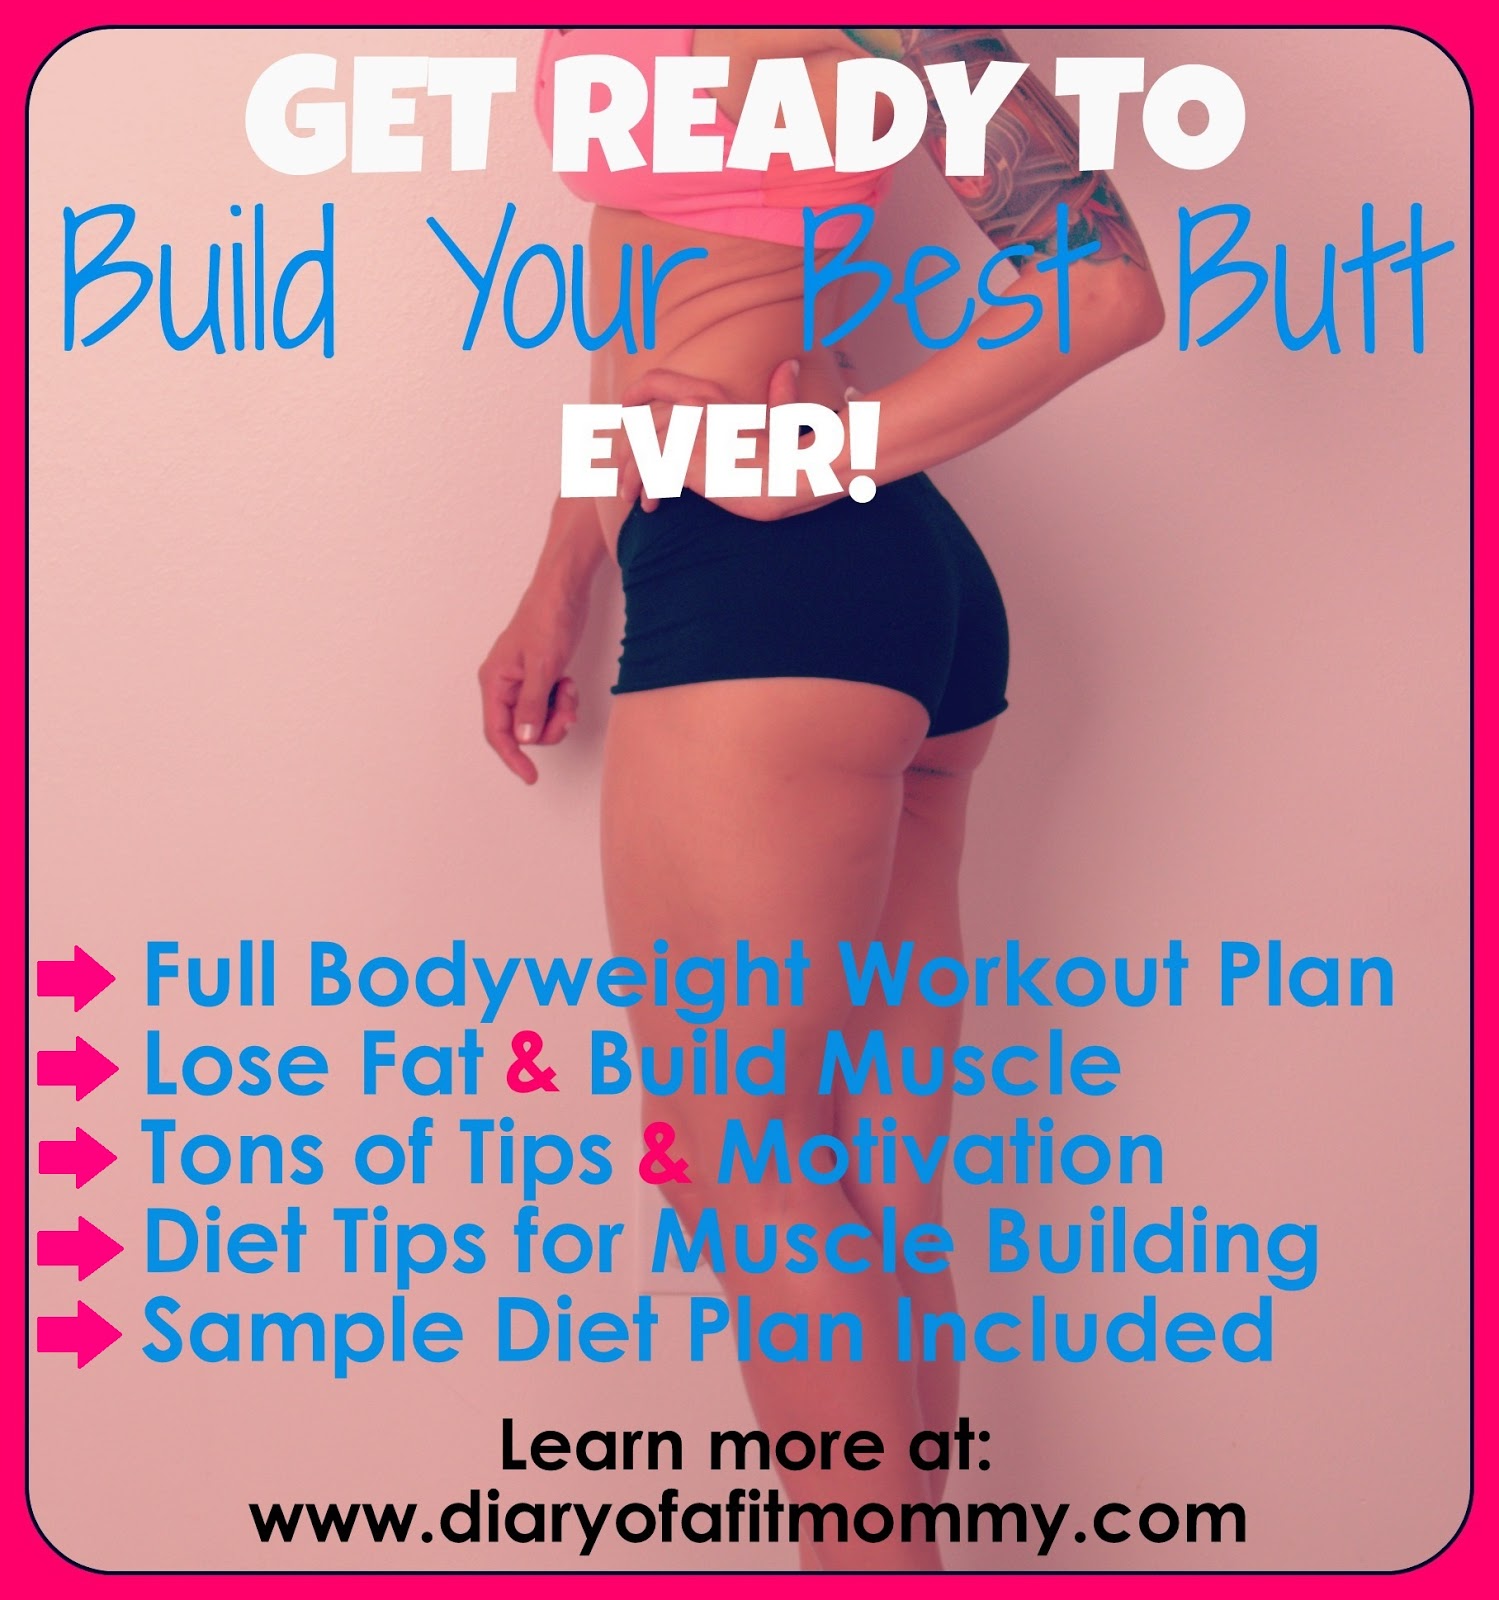 Diary Of A Fit Mommy Booty Building Bootcamp Program 1560 Hot Sex Picture